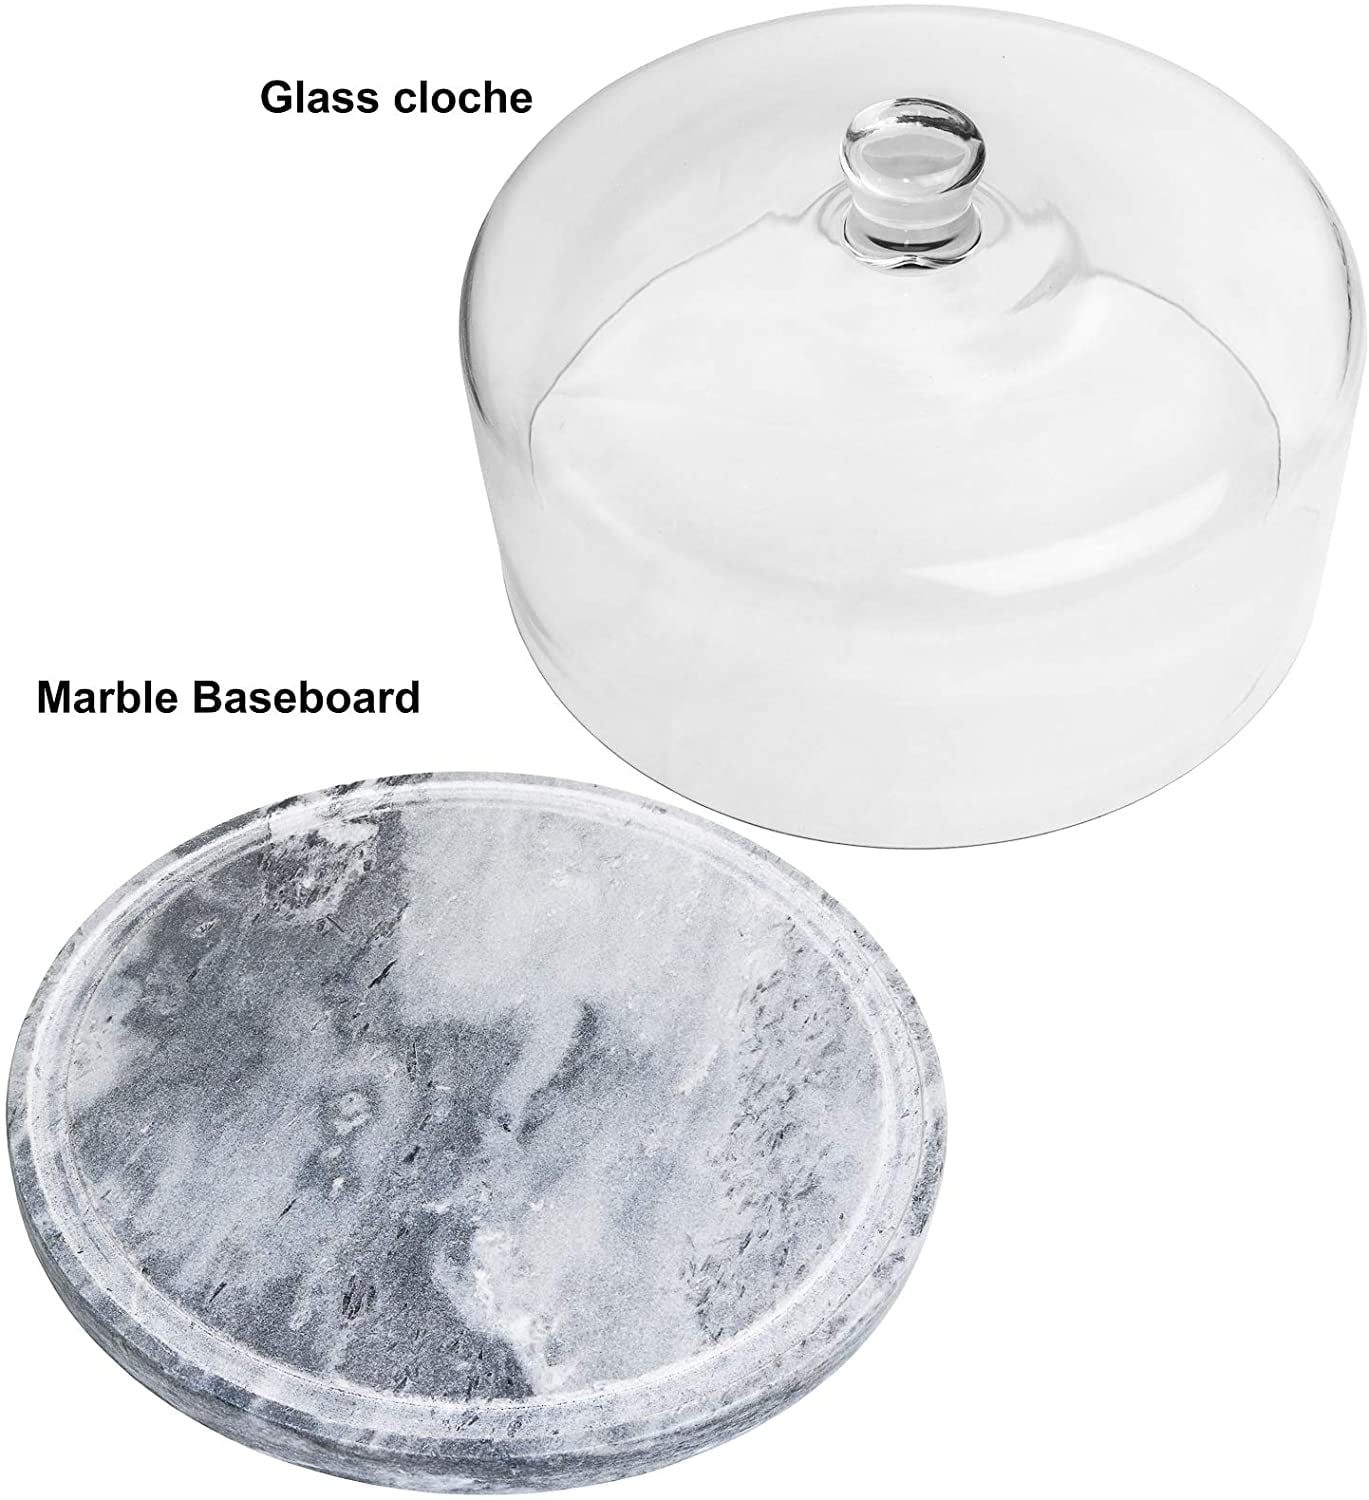 8.7 In Marble Cake Stand w/ Glass Cover Dome Multifunctional Serving Platter 